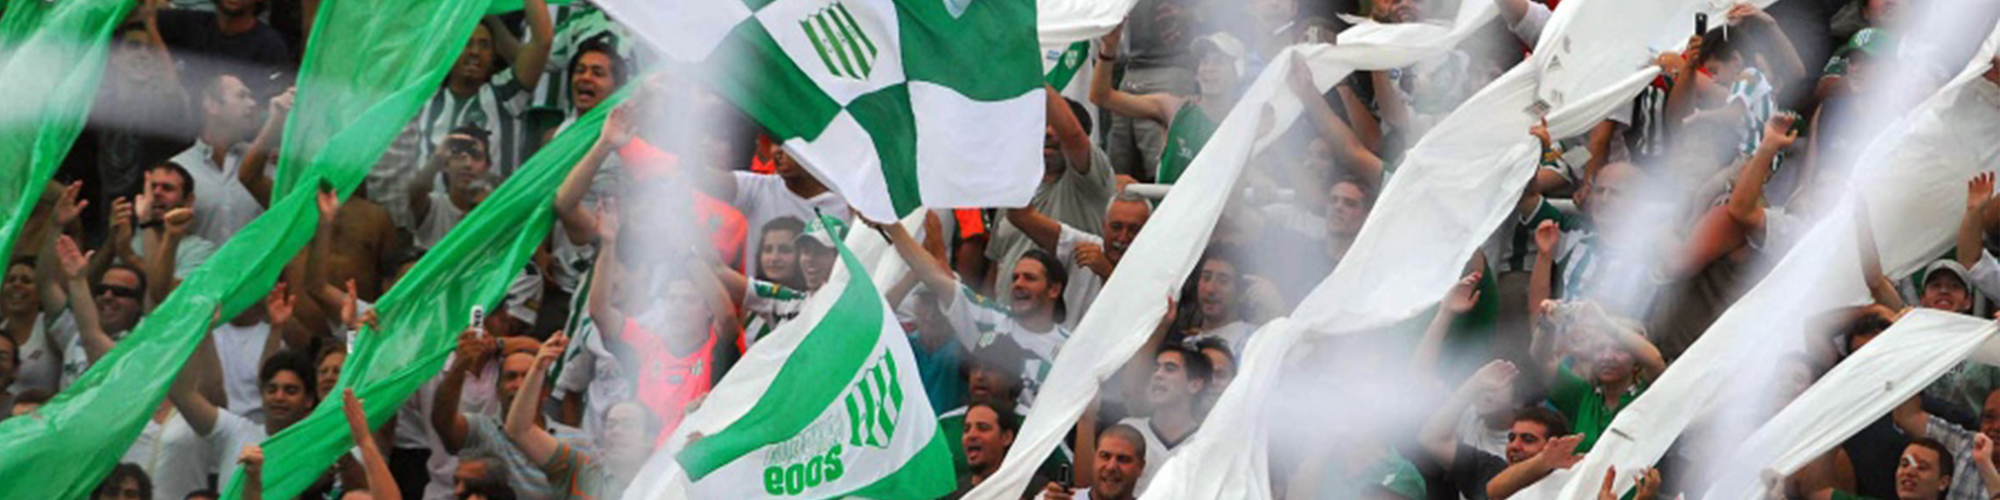 Banfield Tickets & Experiences